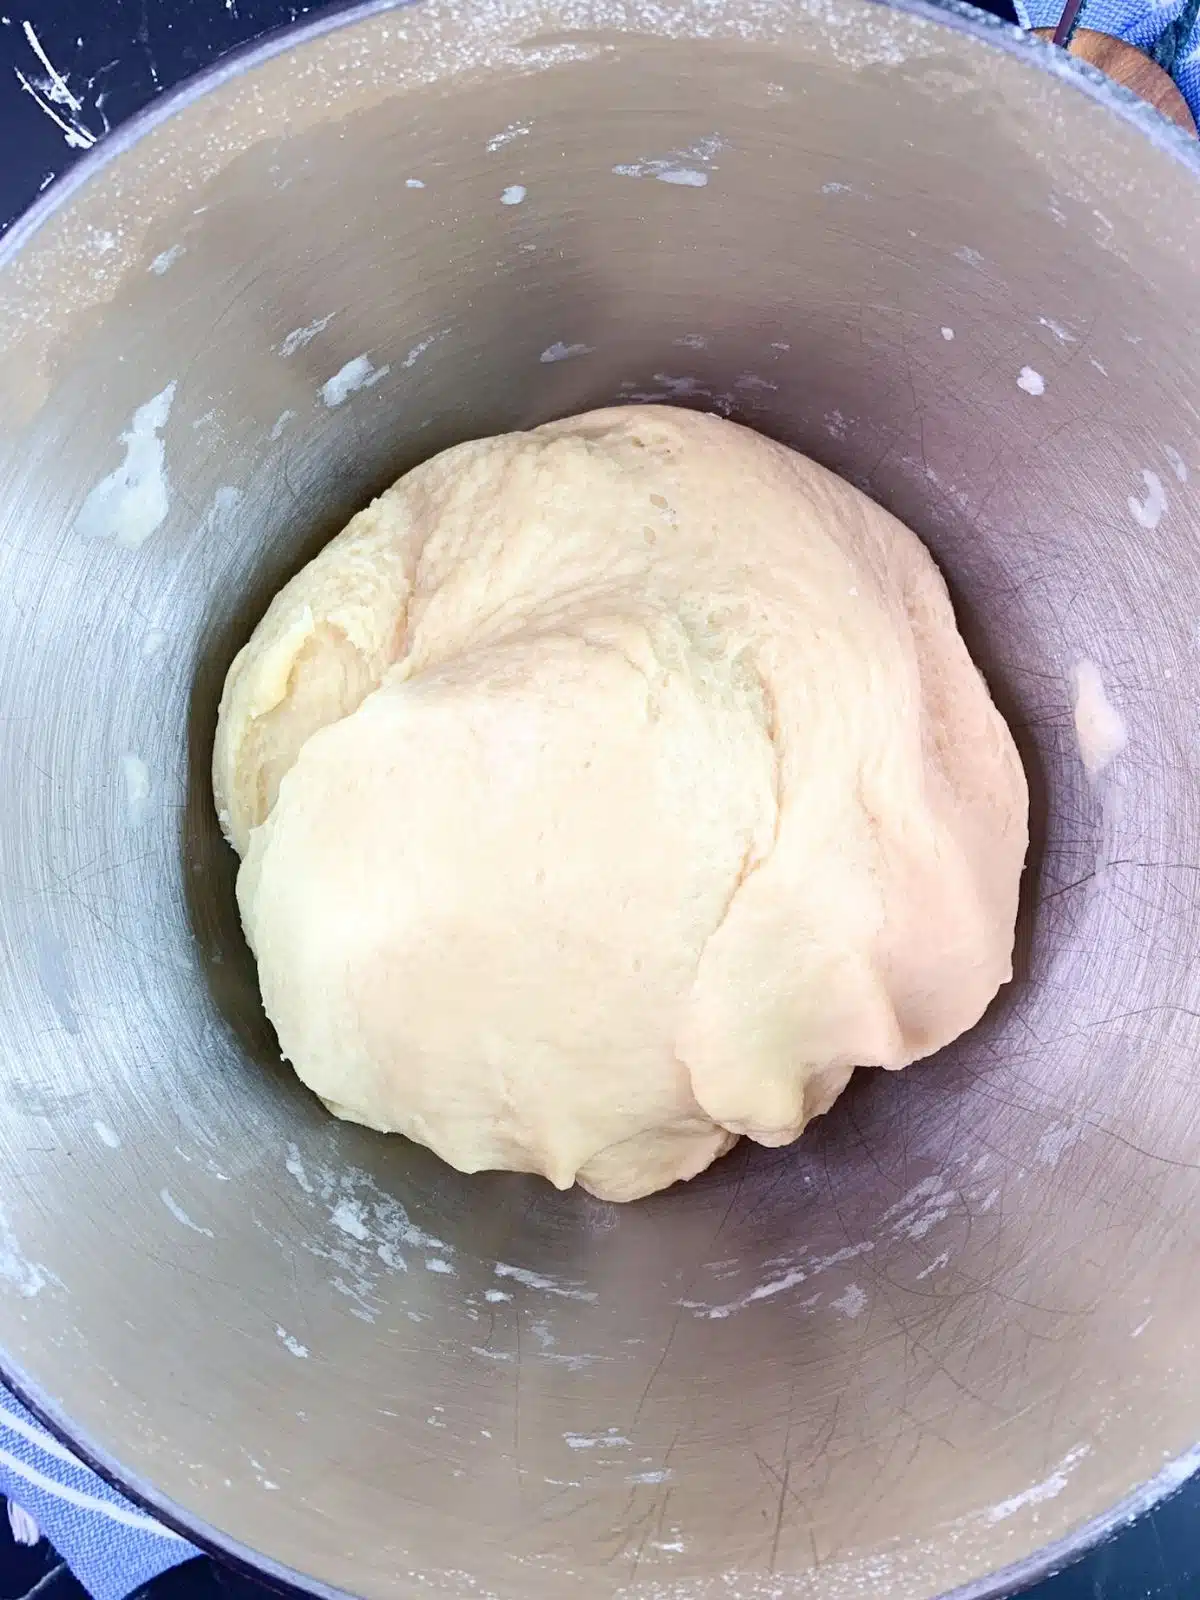 Bread dough before kneading in mixing bowl.